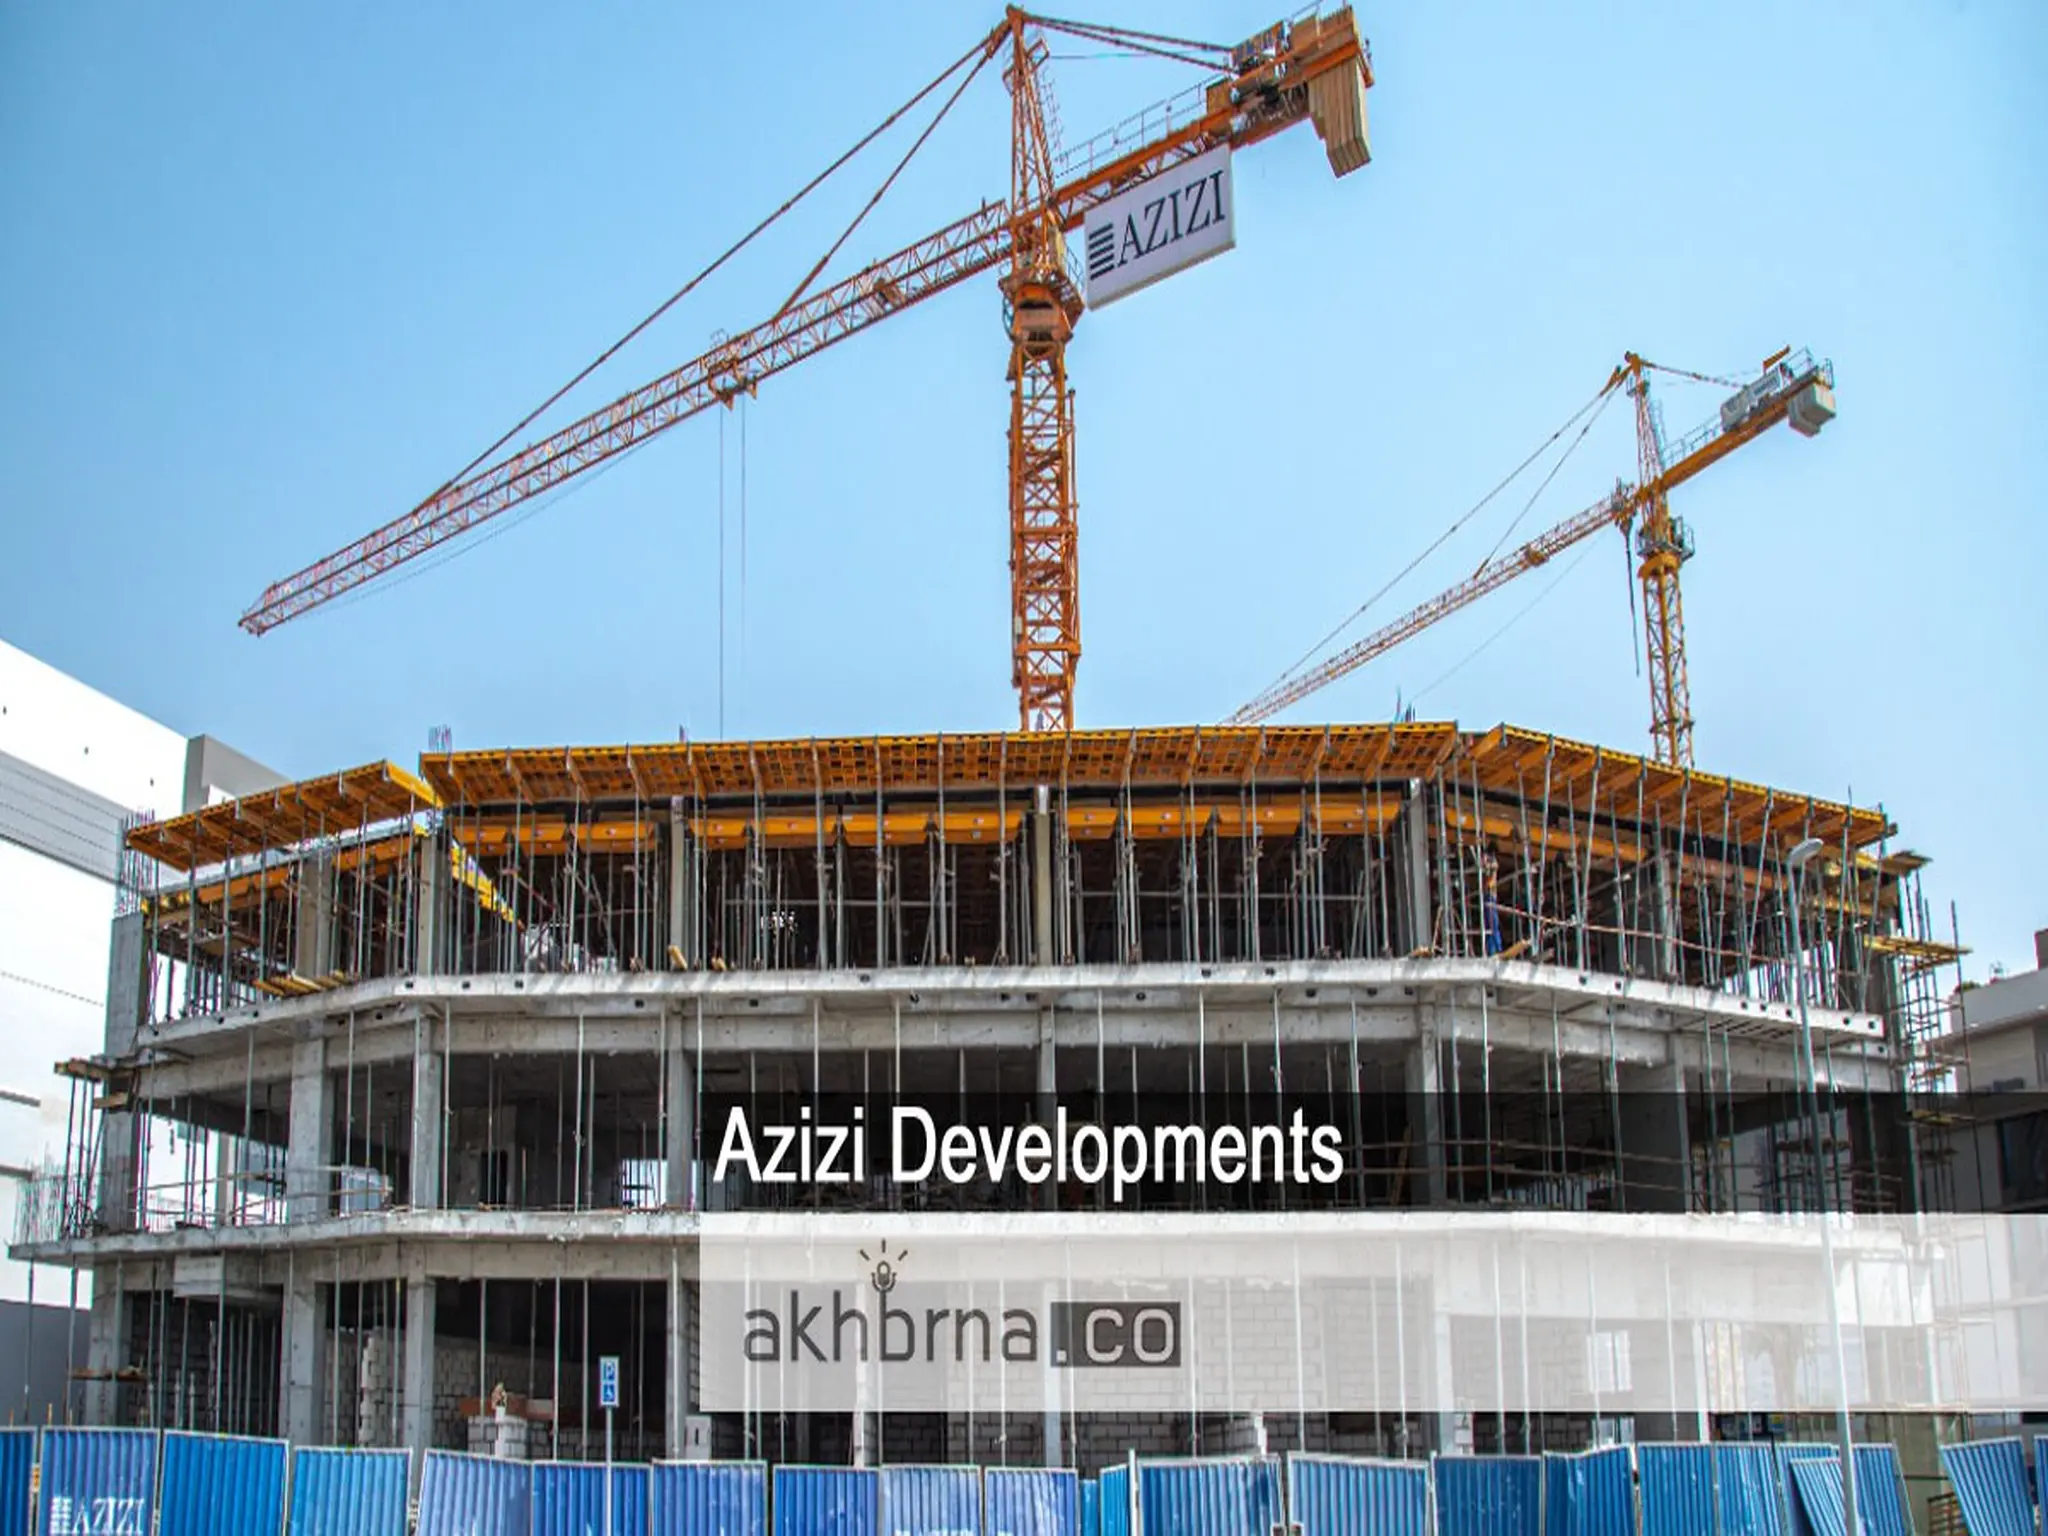 Introducing a global hotel brand, Azizi Developments expands into the hospitality industry : ATM Dubai 2023